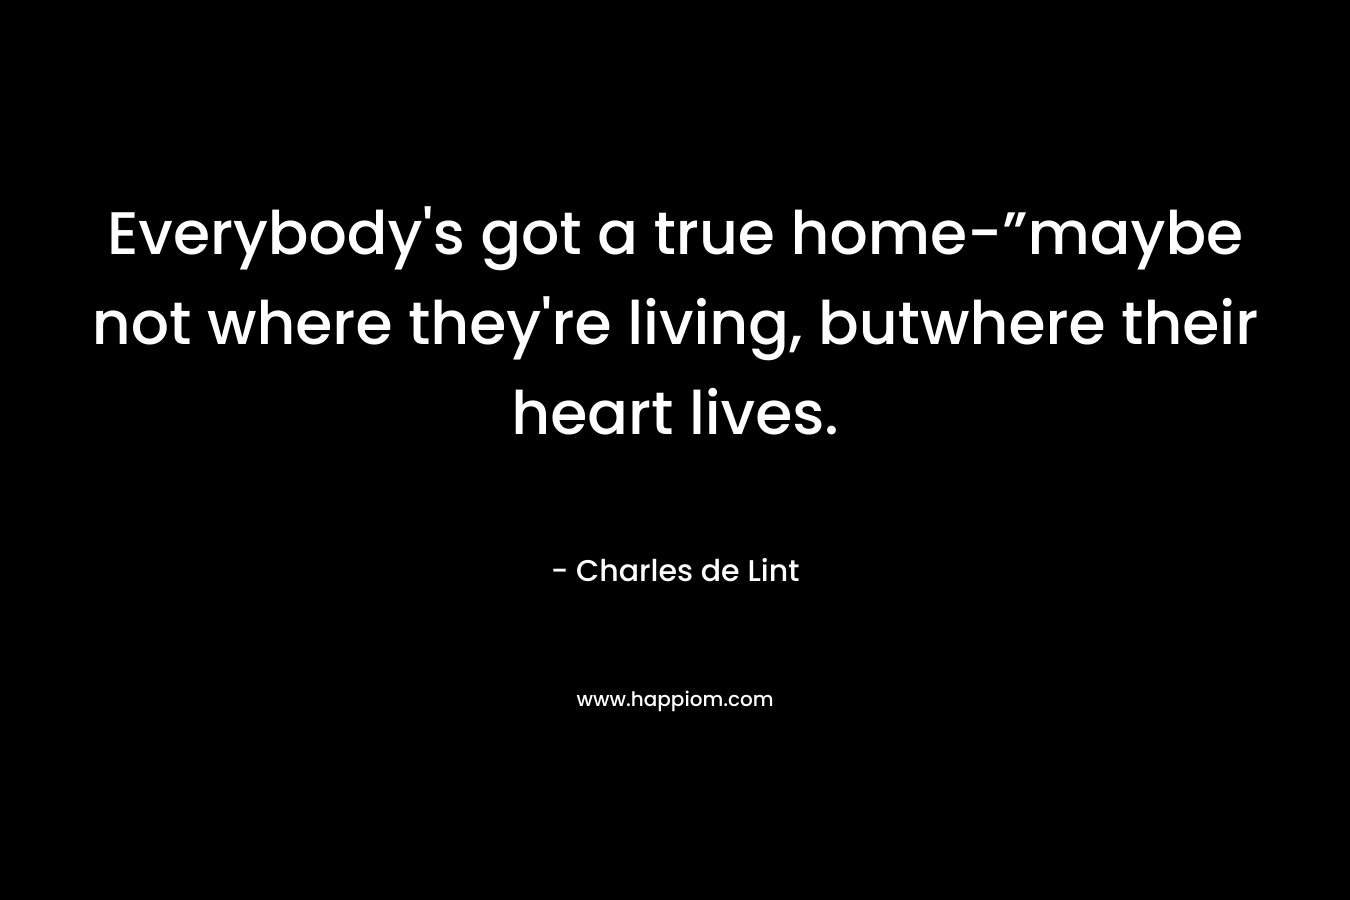 Everybody’s got a true home-”maybe not where they’re living, butwhere their heart lives. – Charles de Lint